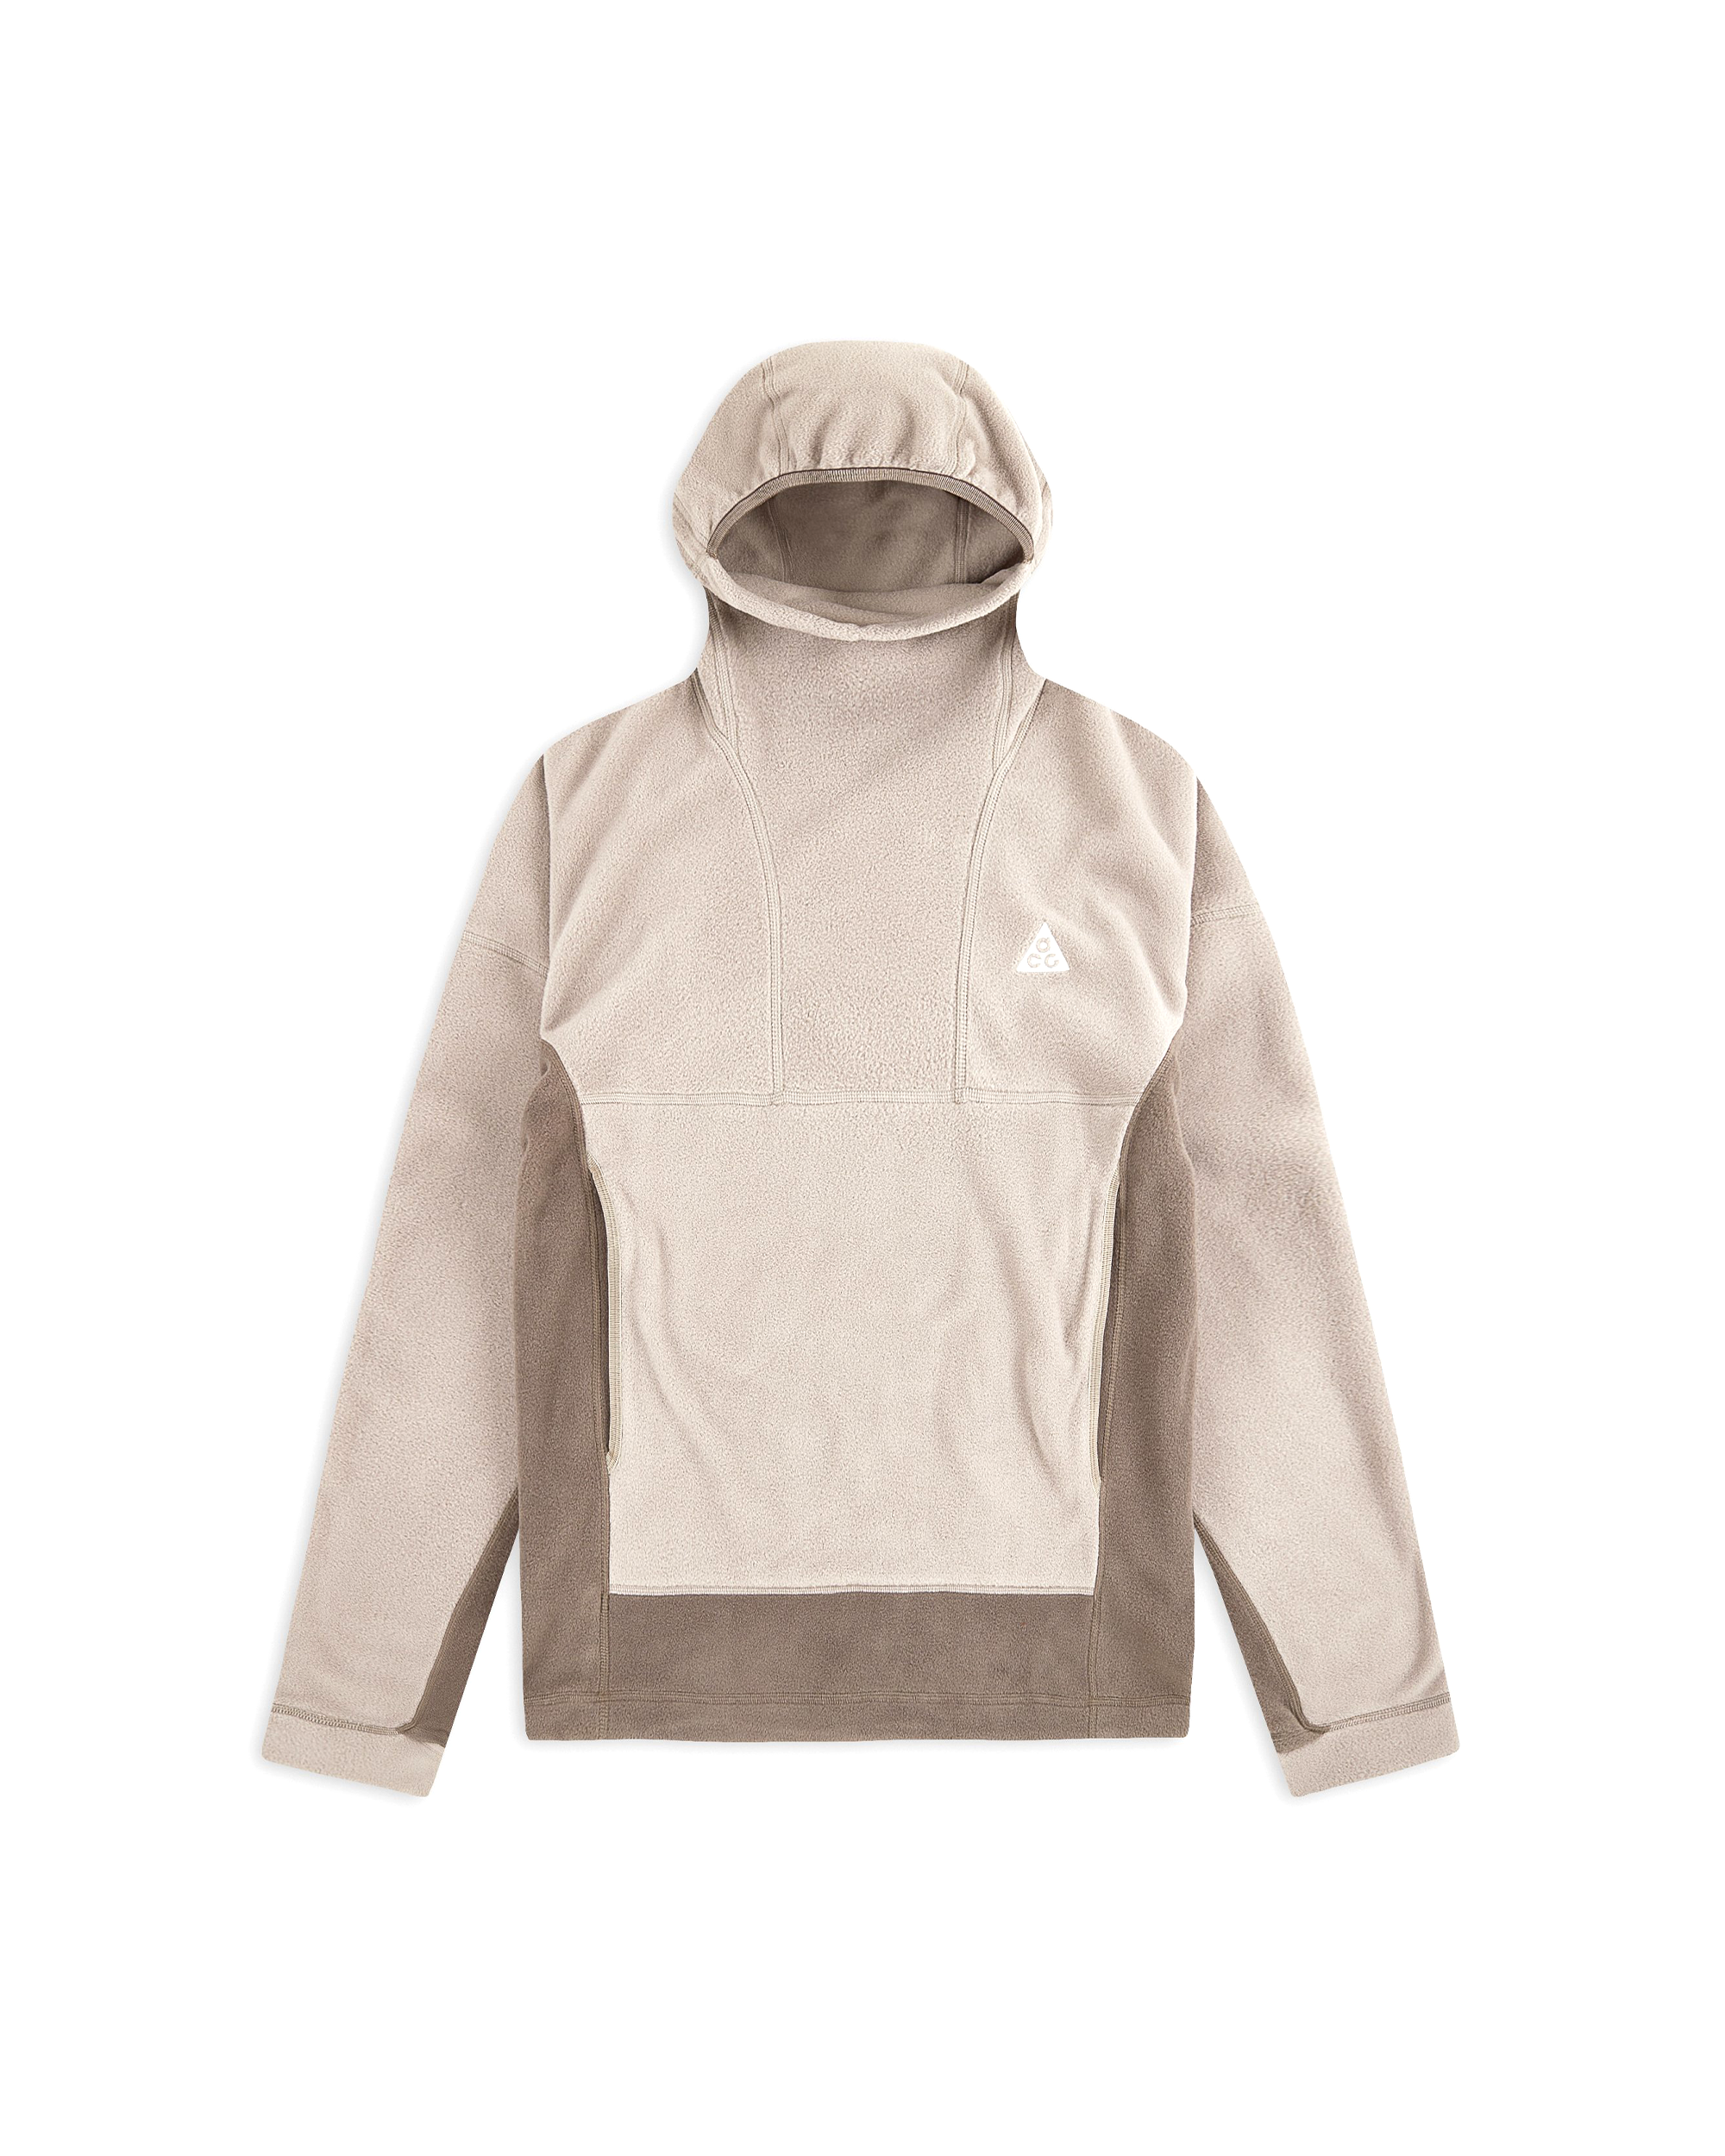 Wolf Tree Therma-Fit Hooded Sweatshirt - Moon Fossil / Olive Gray / Summit White